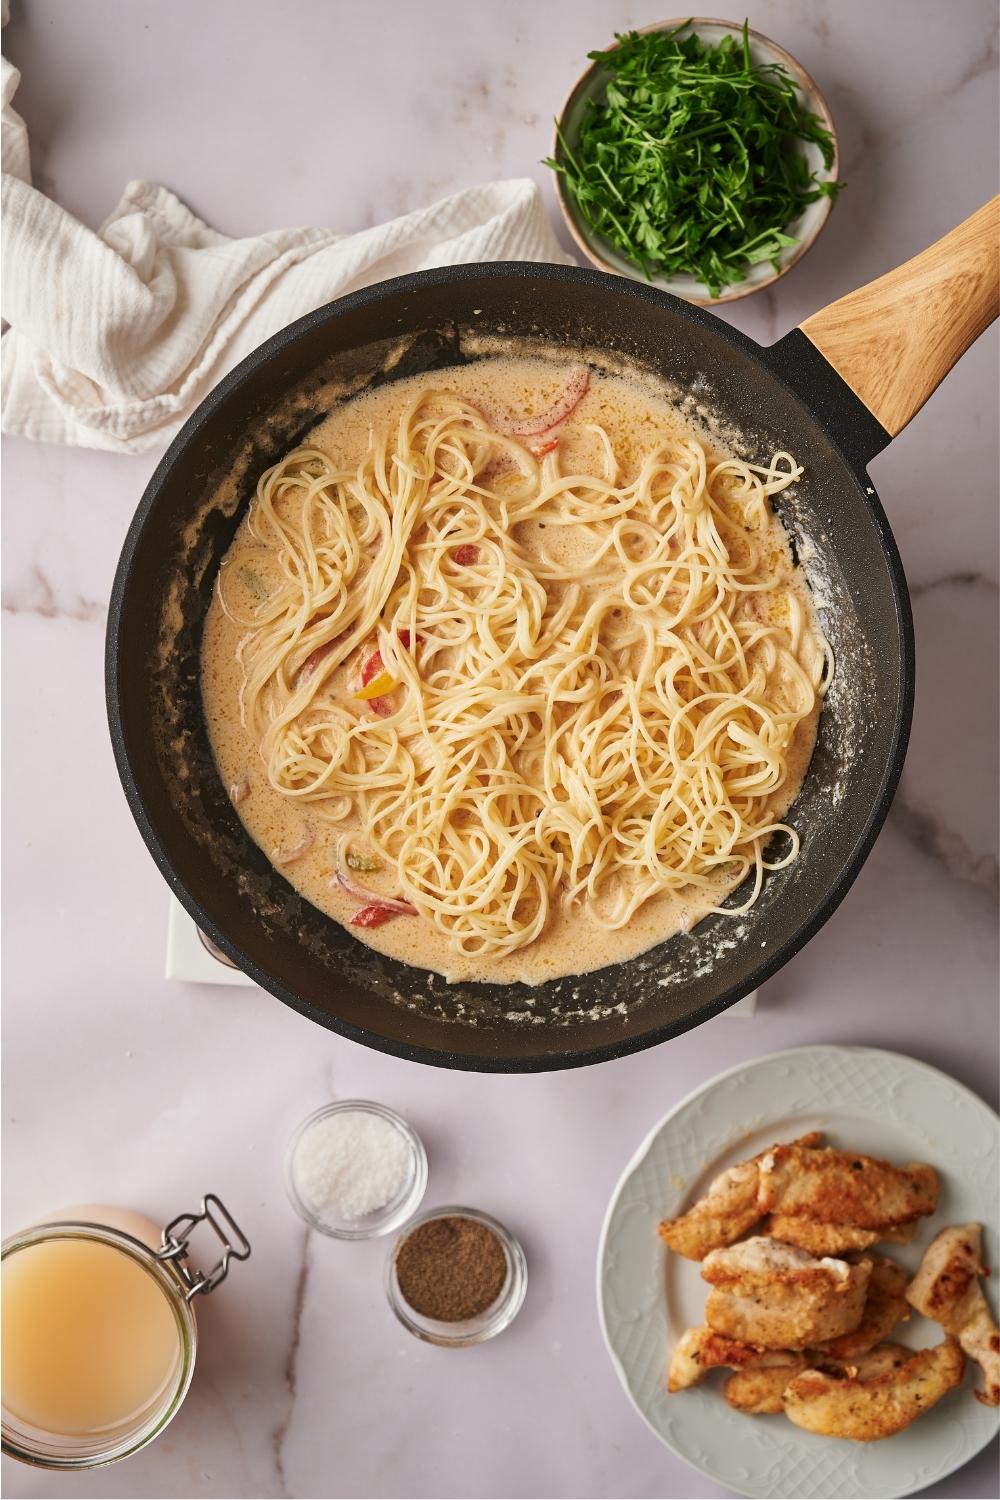 A skillet with sauteed veggies and scampi sauce with angel hair pasta freshly added to the skillet. Surrounding the skillet are plates and bowls of ingredients such as cooked chicken, salt, pepper, and parsley. There is a white napkin next to the skillet.